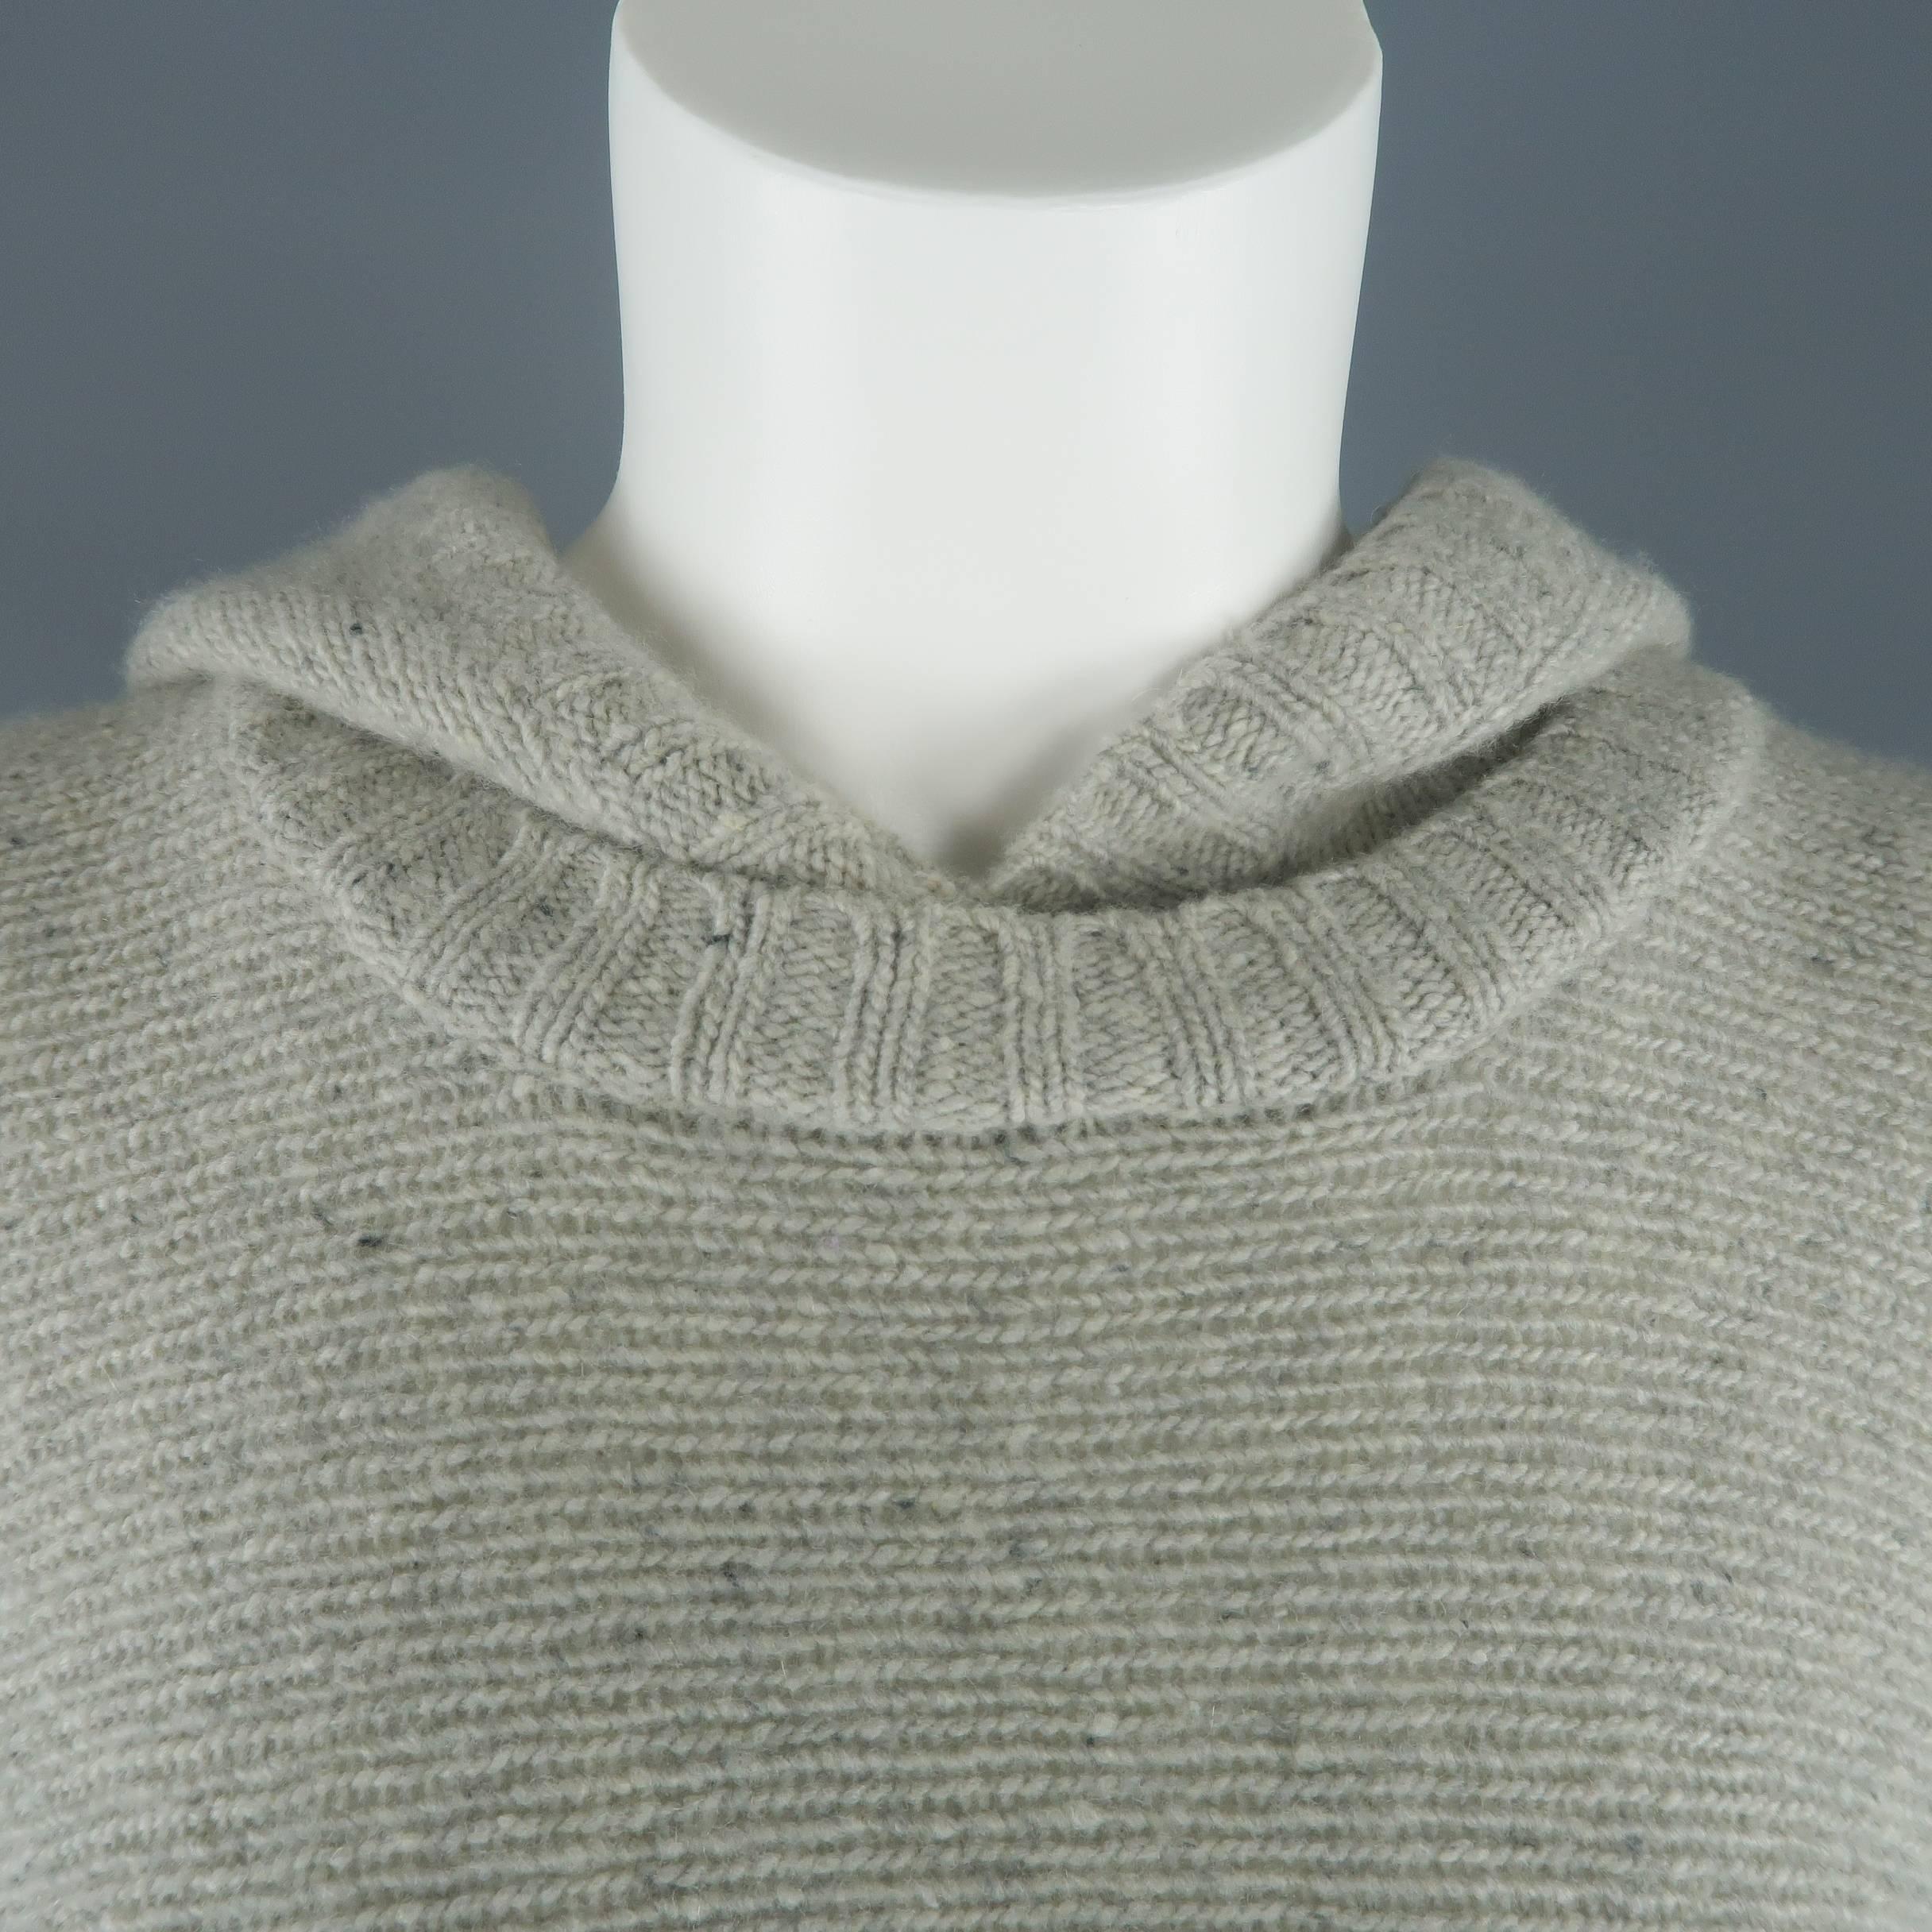 Ralph Lauren Black Label poncho comes in light speckled gray cashmere knit and features a round neck with hood, frontal hoodie pocket, and half closed sides.
 
Excellent Pre-Owned Condition.
Marked: M/L
 
Measurements:
 
Width: 44 in.
Length: 31 in.